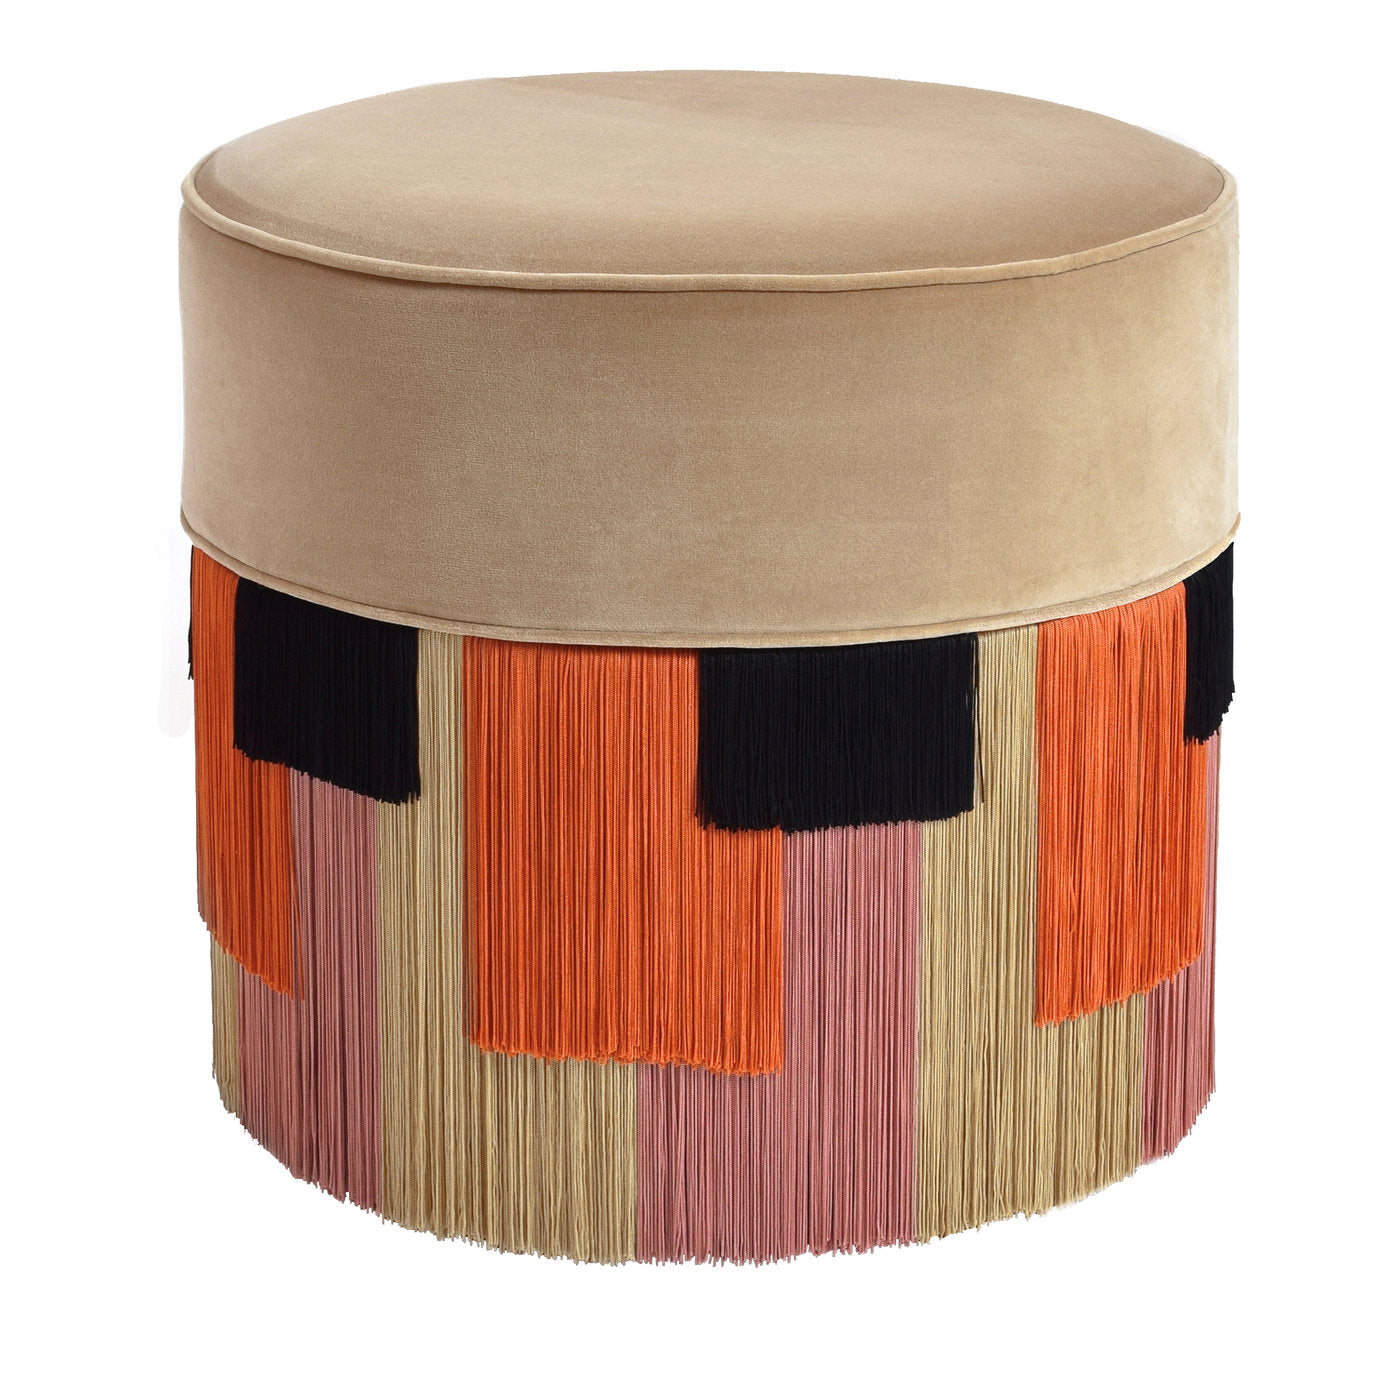 Beige Cylinde Wood Pouf with Geometric Fringe - Main view